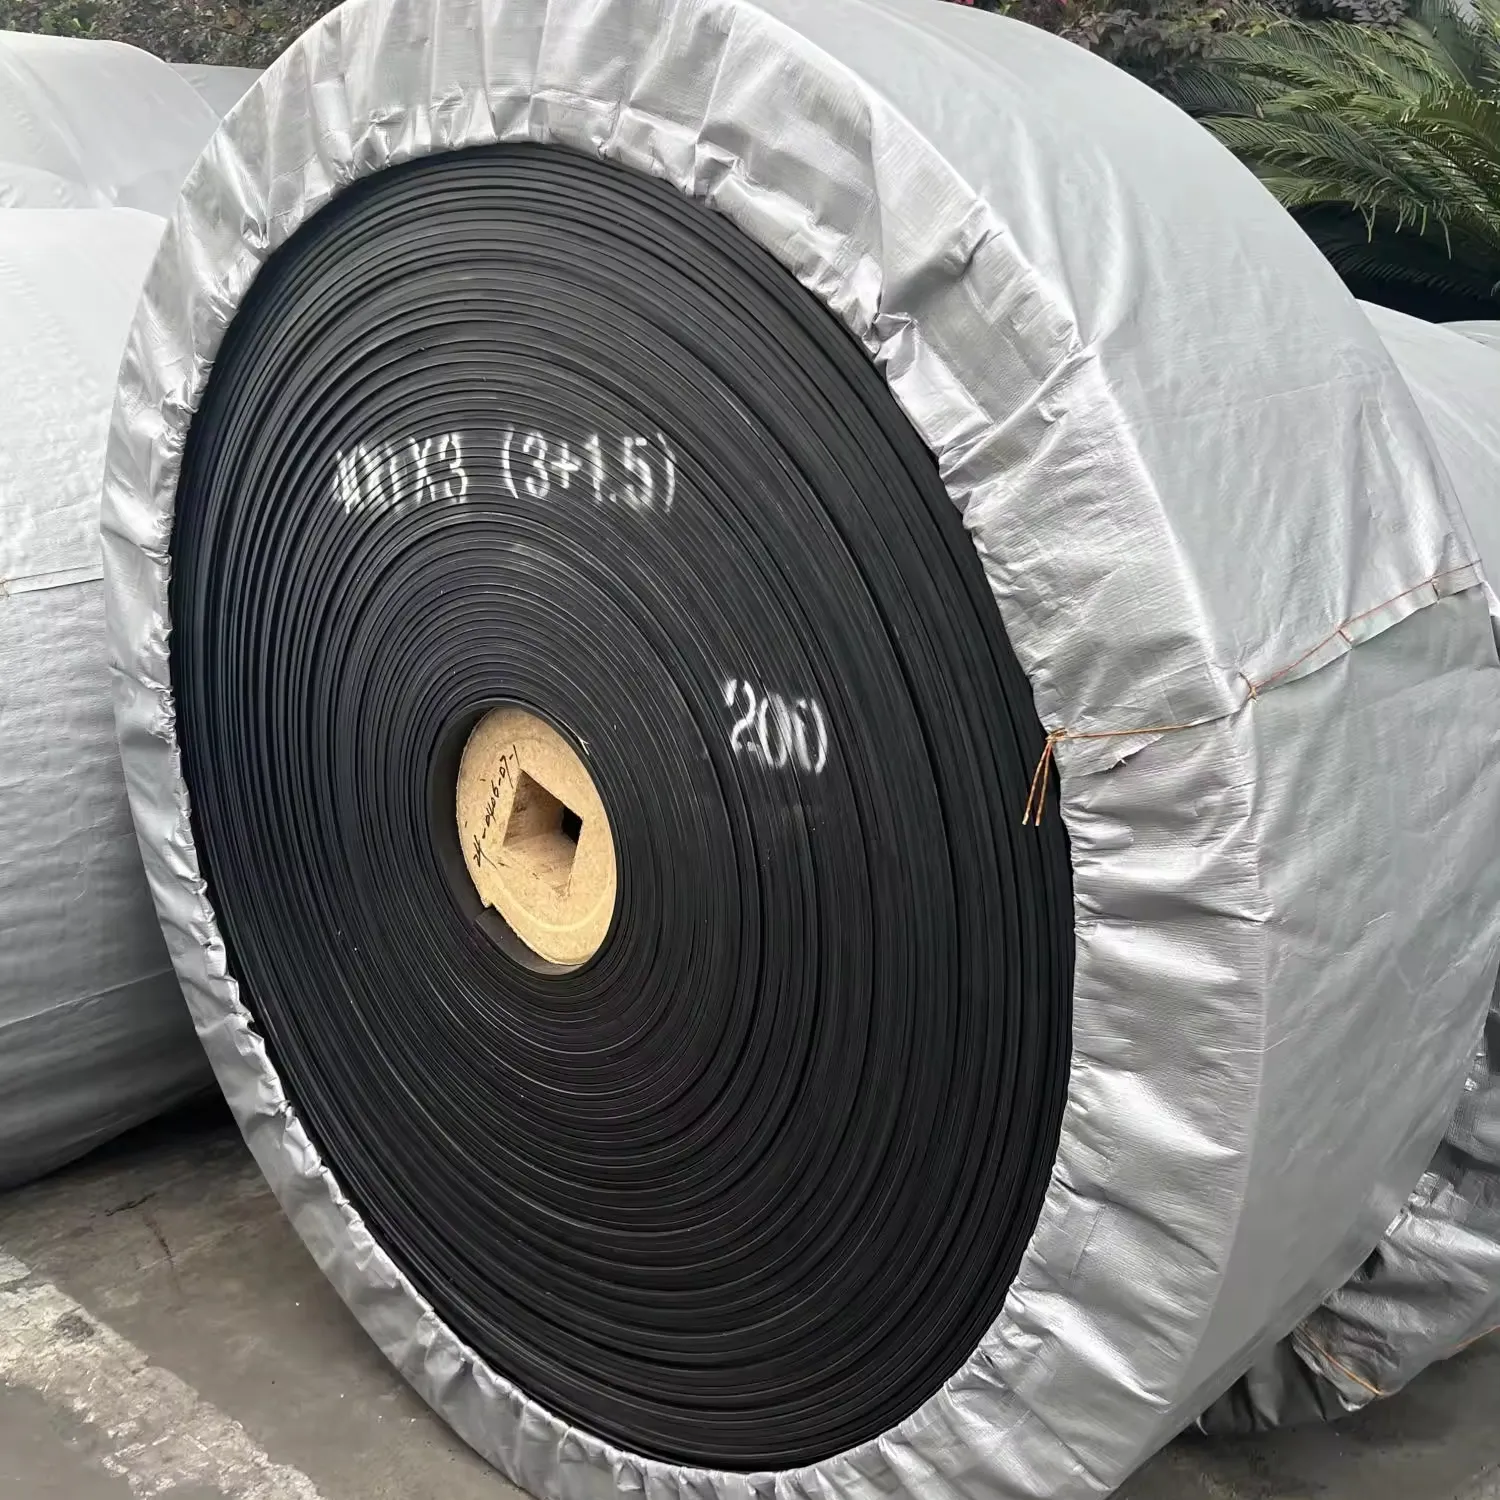 Ep300 Ep500/4 Fabric Ply Wire Rope Core Ep Conveyor Belts Rubber Sheet For Belt Making